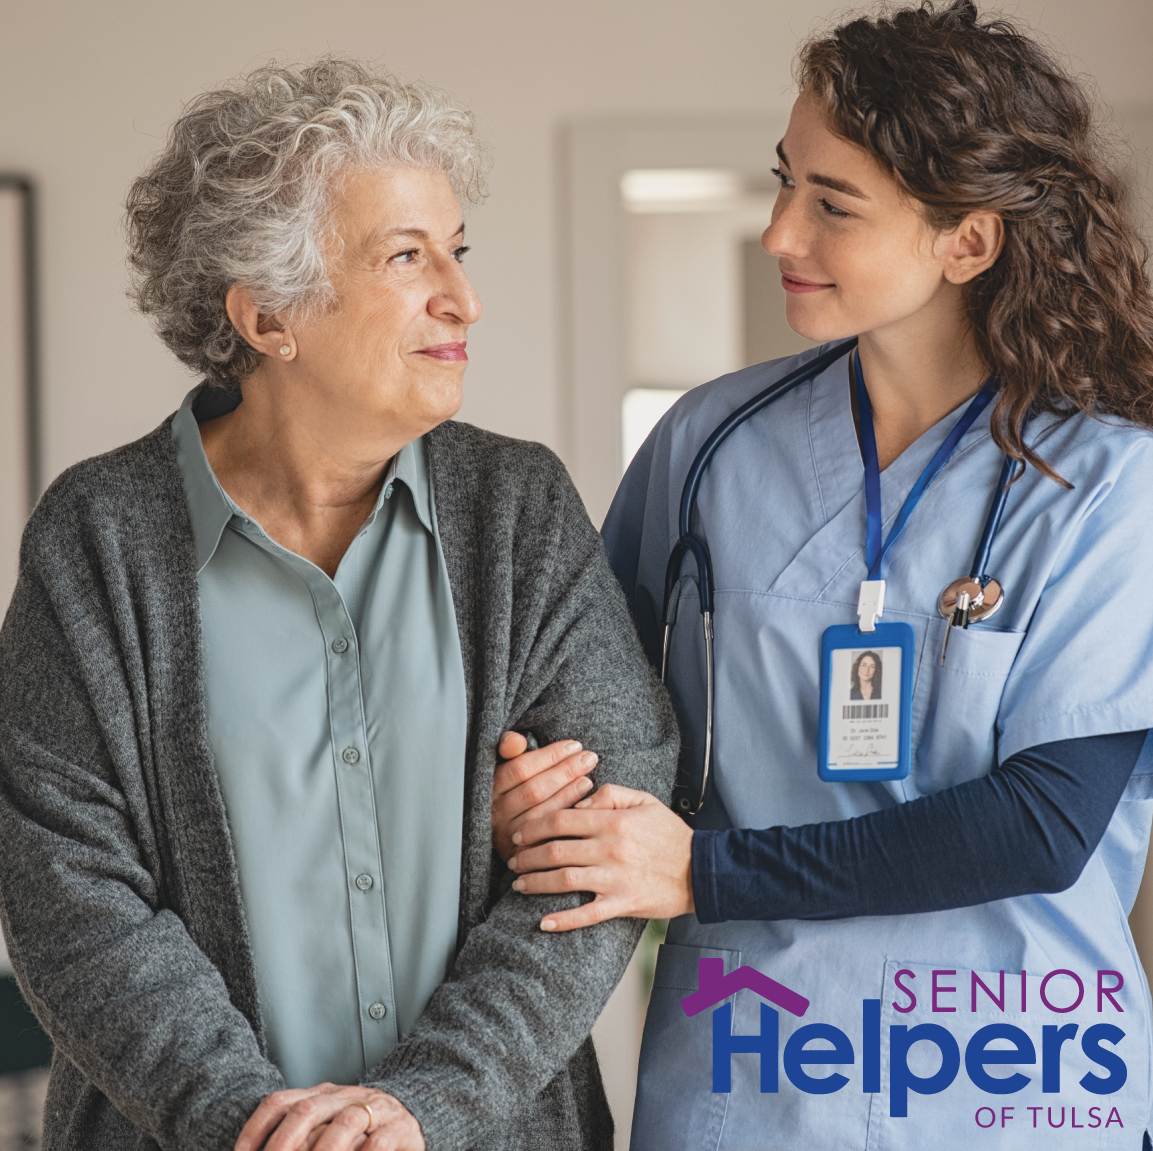 From keeping your loved one company to ensuring there is someone around to help take a loved one to the doctor when you can't be there, there are many benefits to choosing in-home senior care with Senior Helpers.